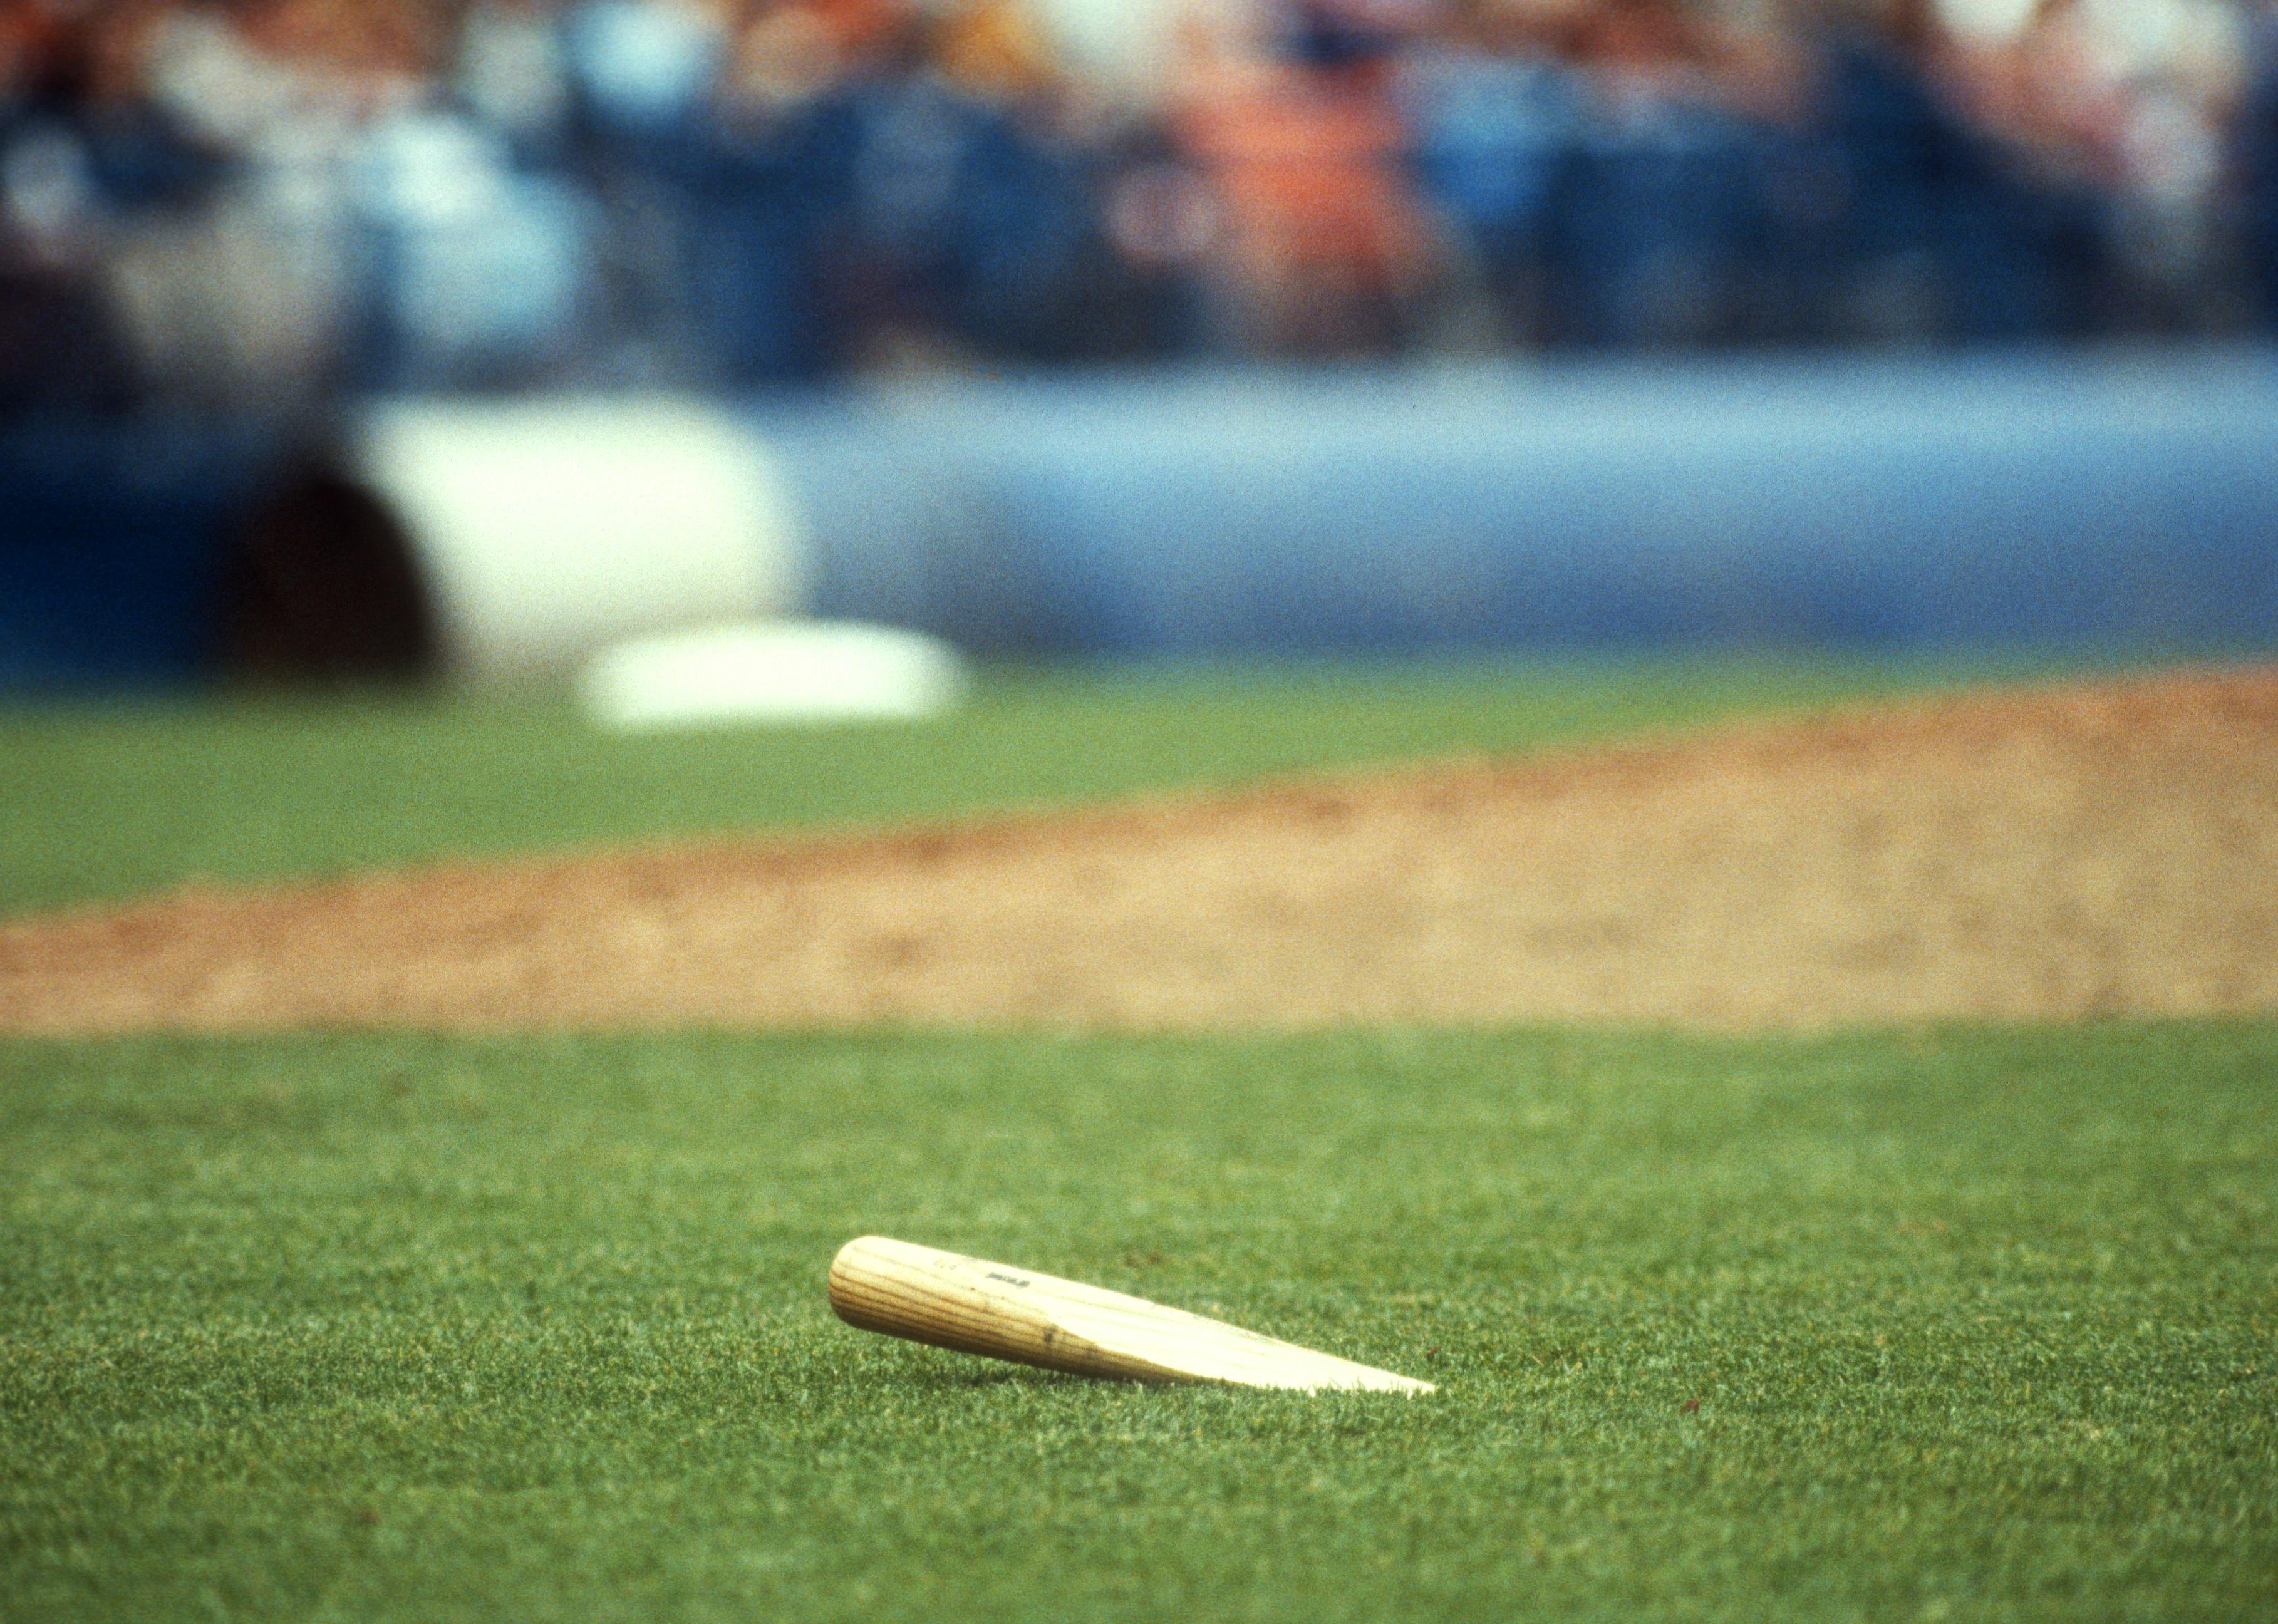 General view of a broken bat during an MLB game.